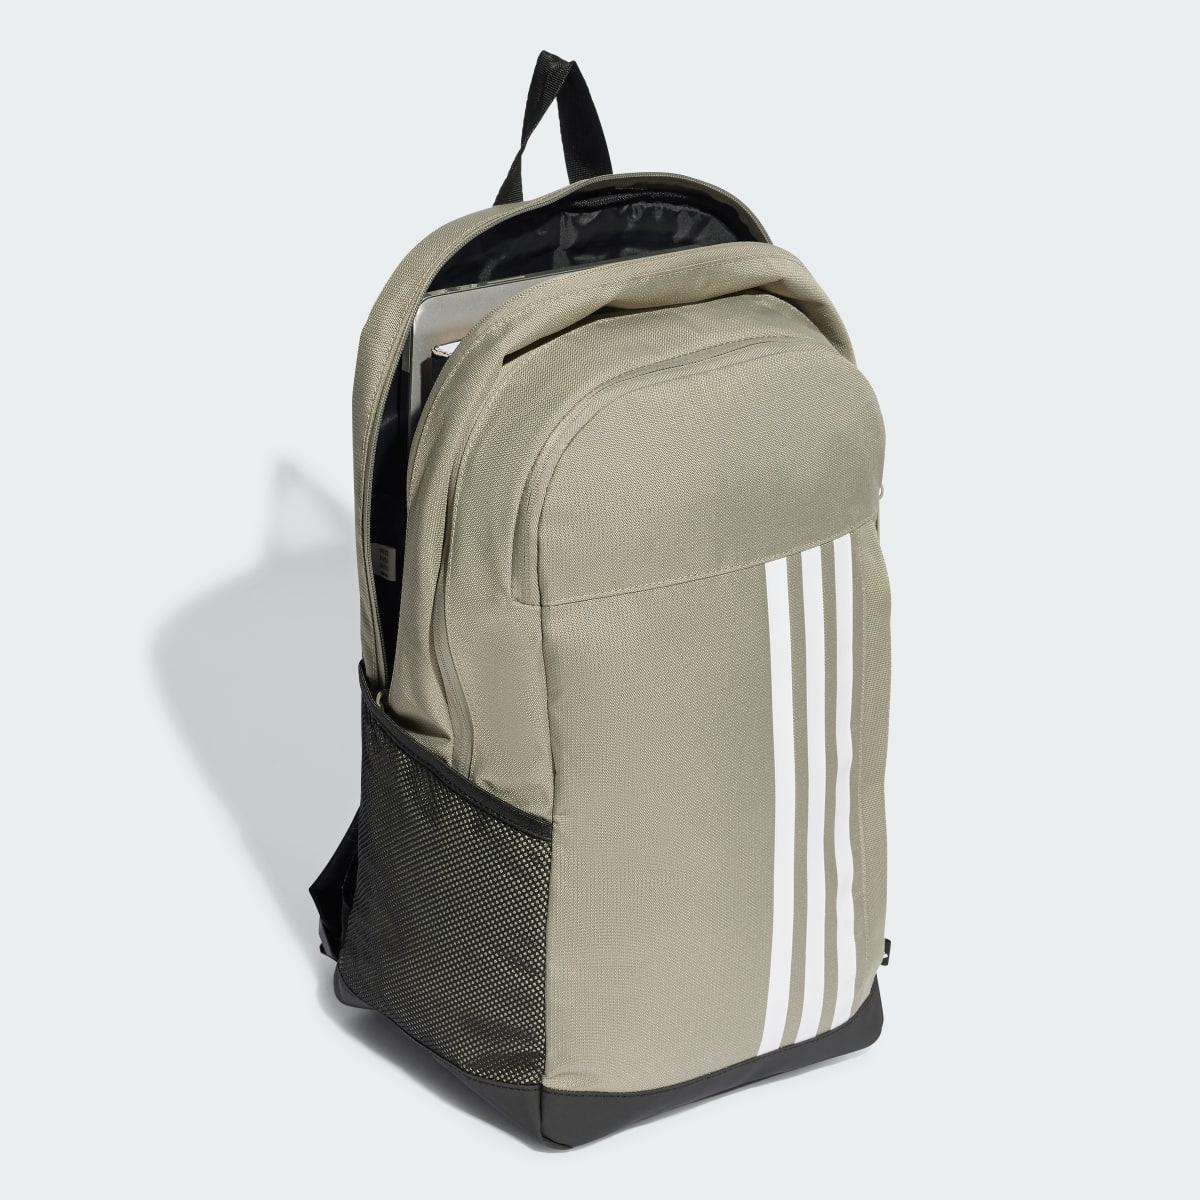 Adidas Motion 3-Stripes Backpack. 5